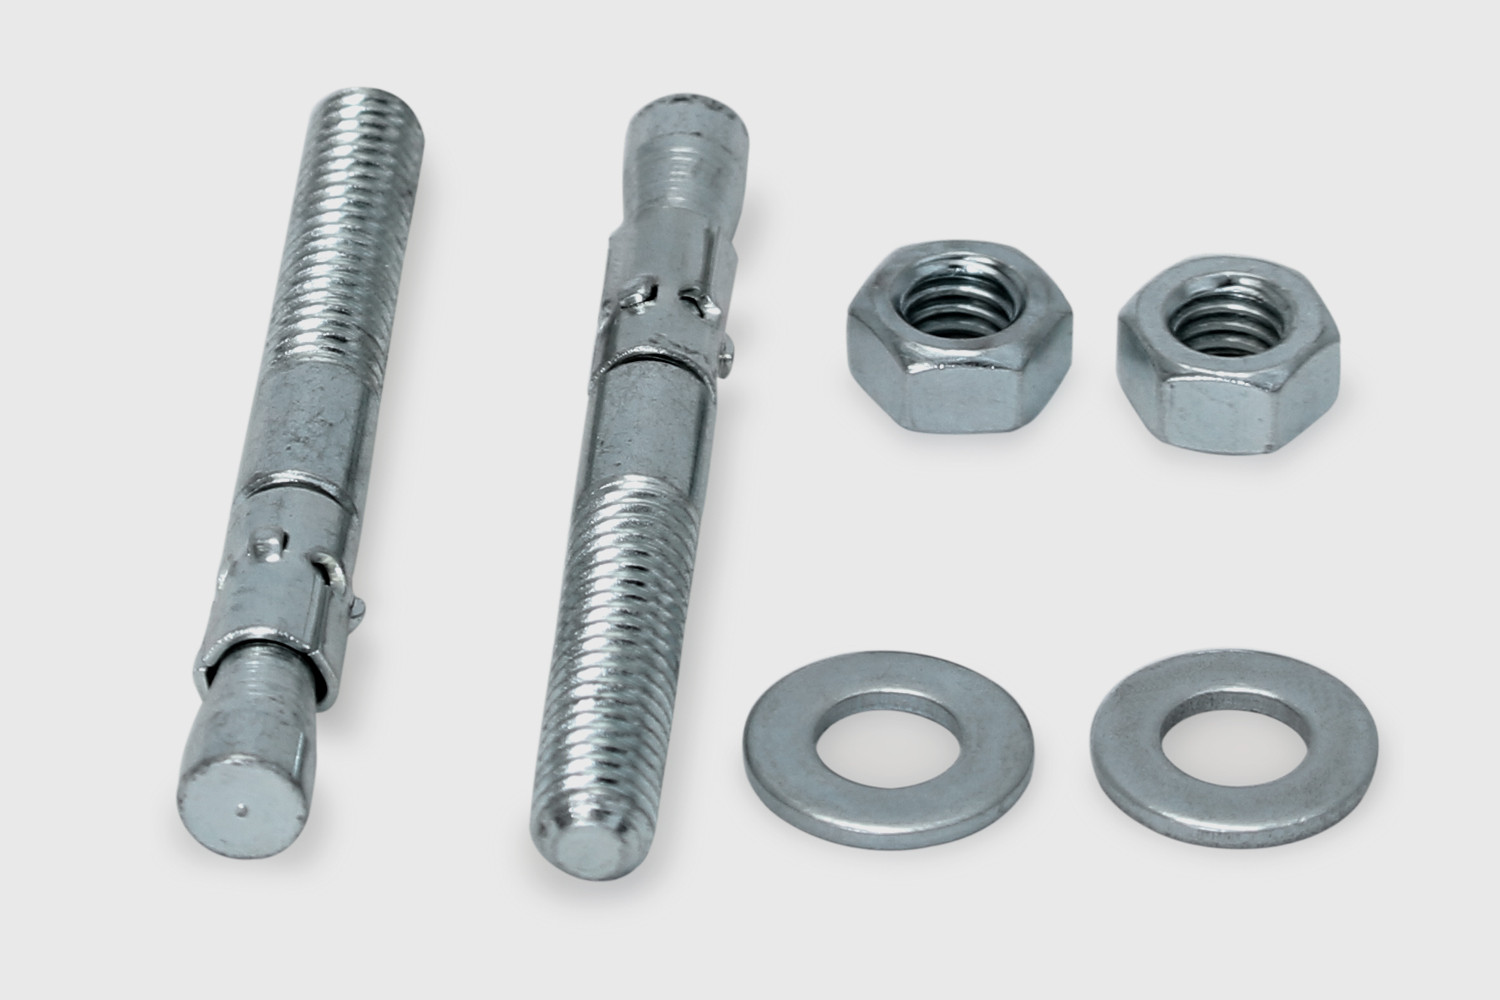 Mounting Bolts